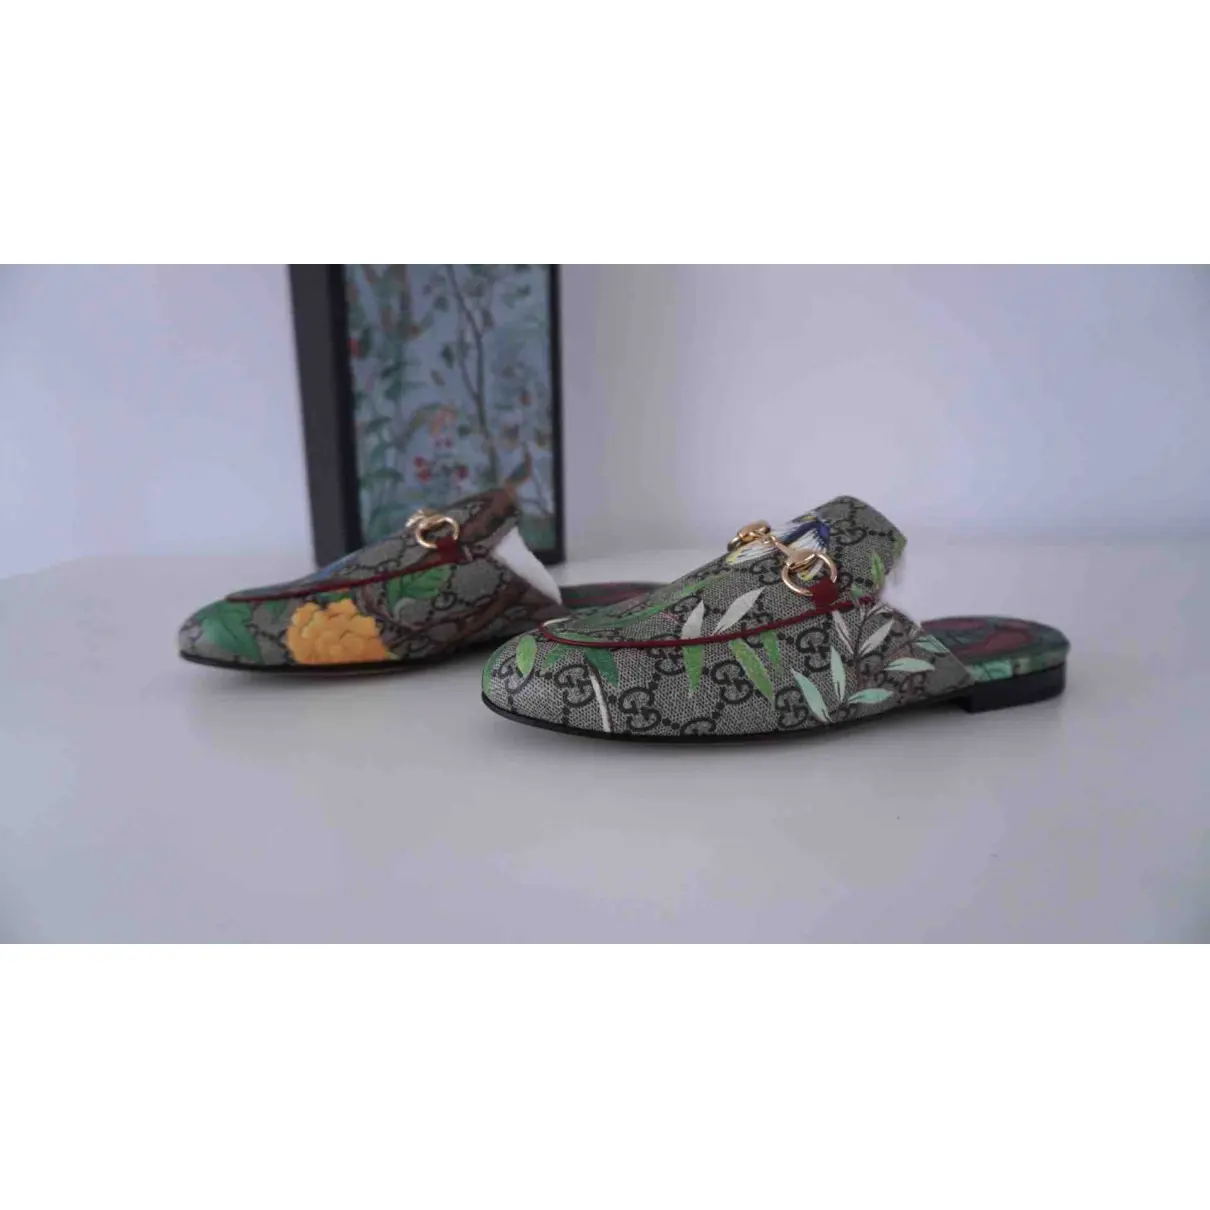 Buy Gucci Princetown cloth sandals online